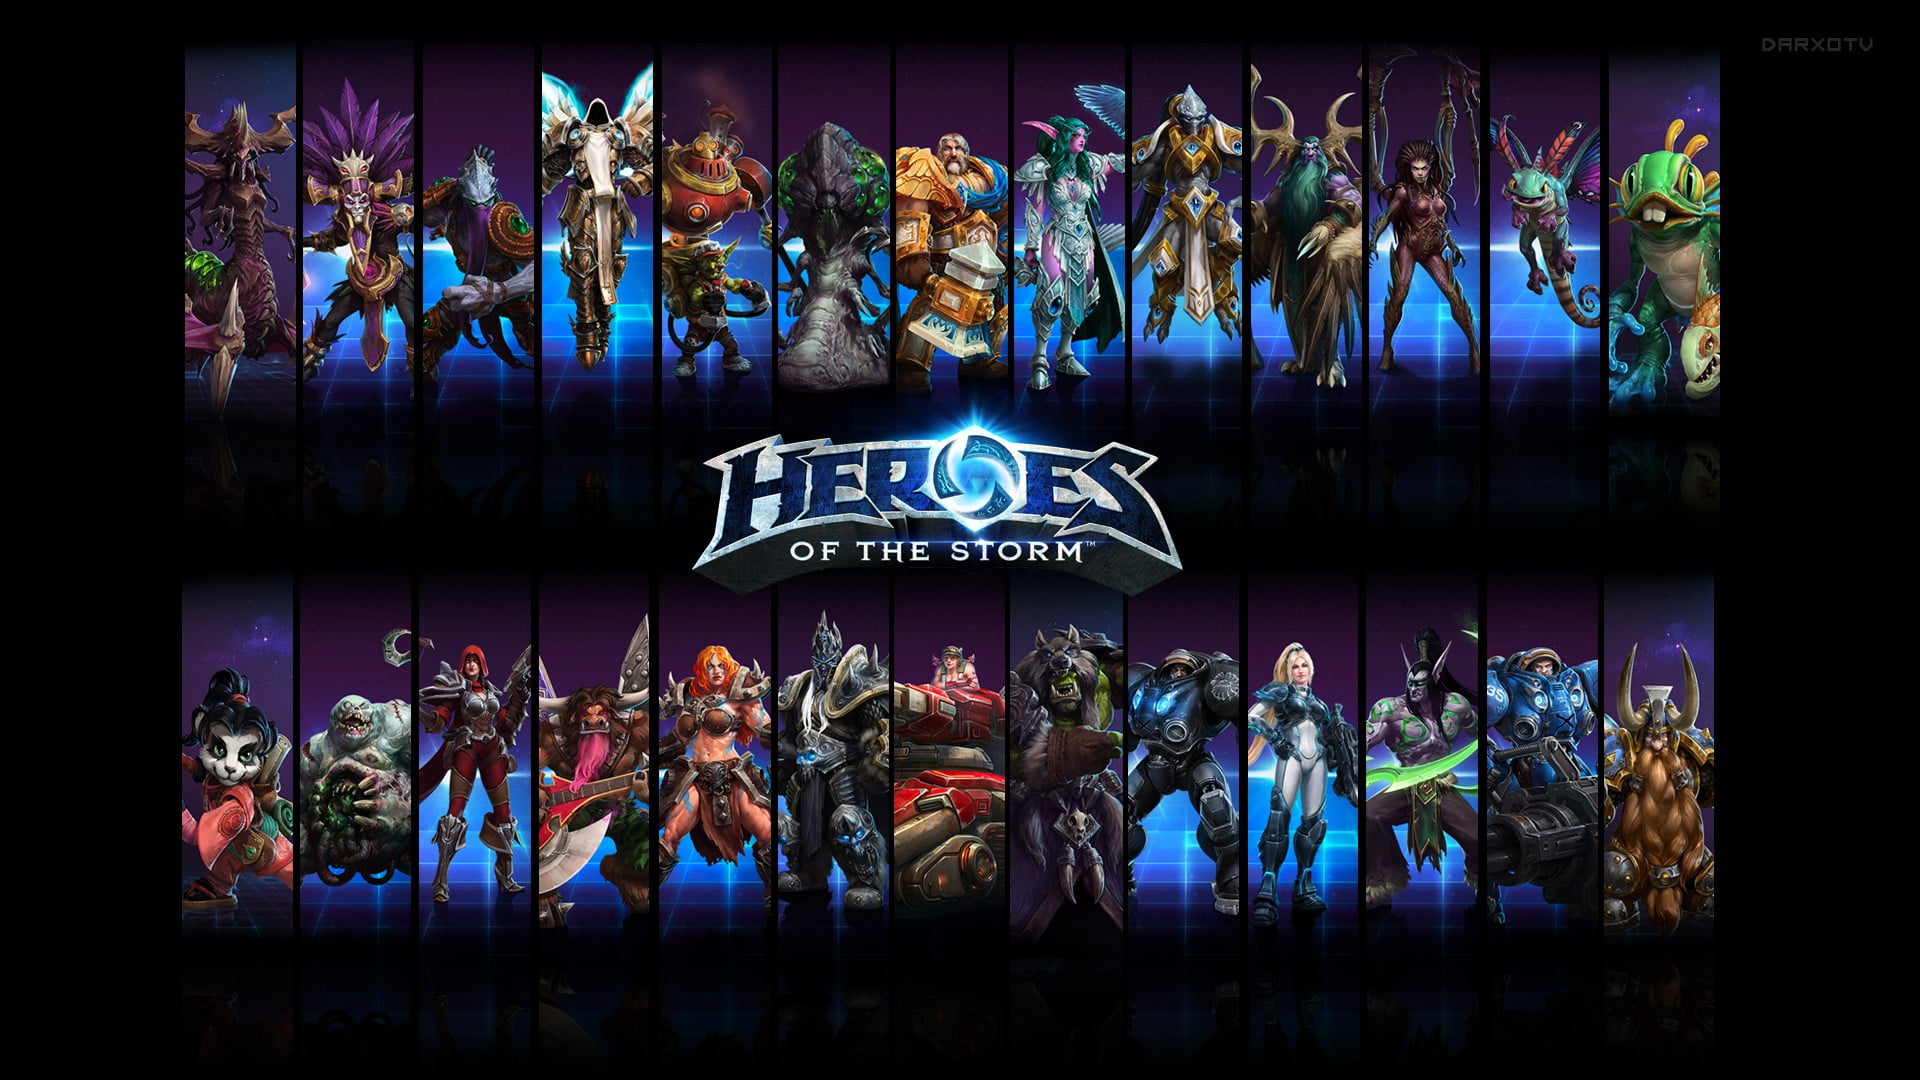 Heroes of the Storm game application, heroes of the storm, Blizzard Entertainment, collage